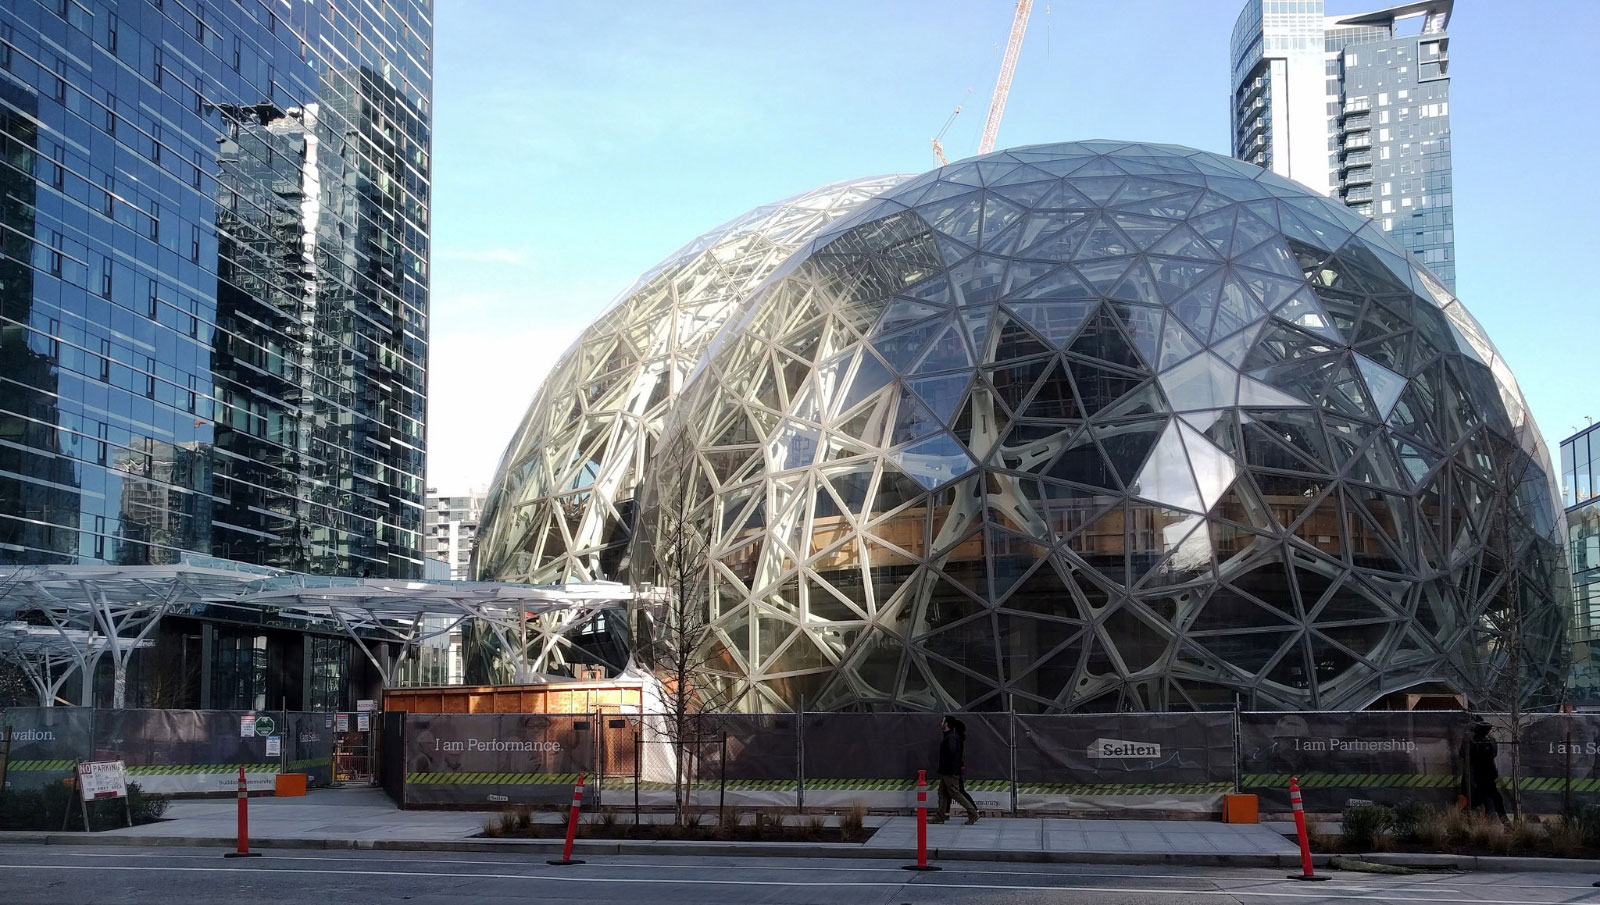 Amazon's three-bubble biosphere outside of its Seattle headquarters. (Brewbooks/Flickr)